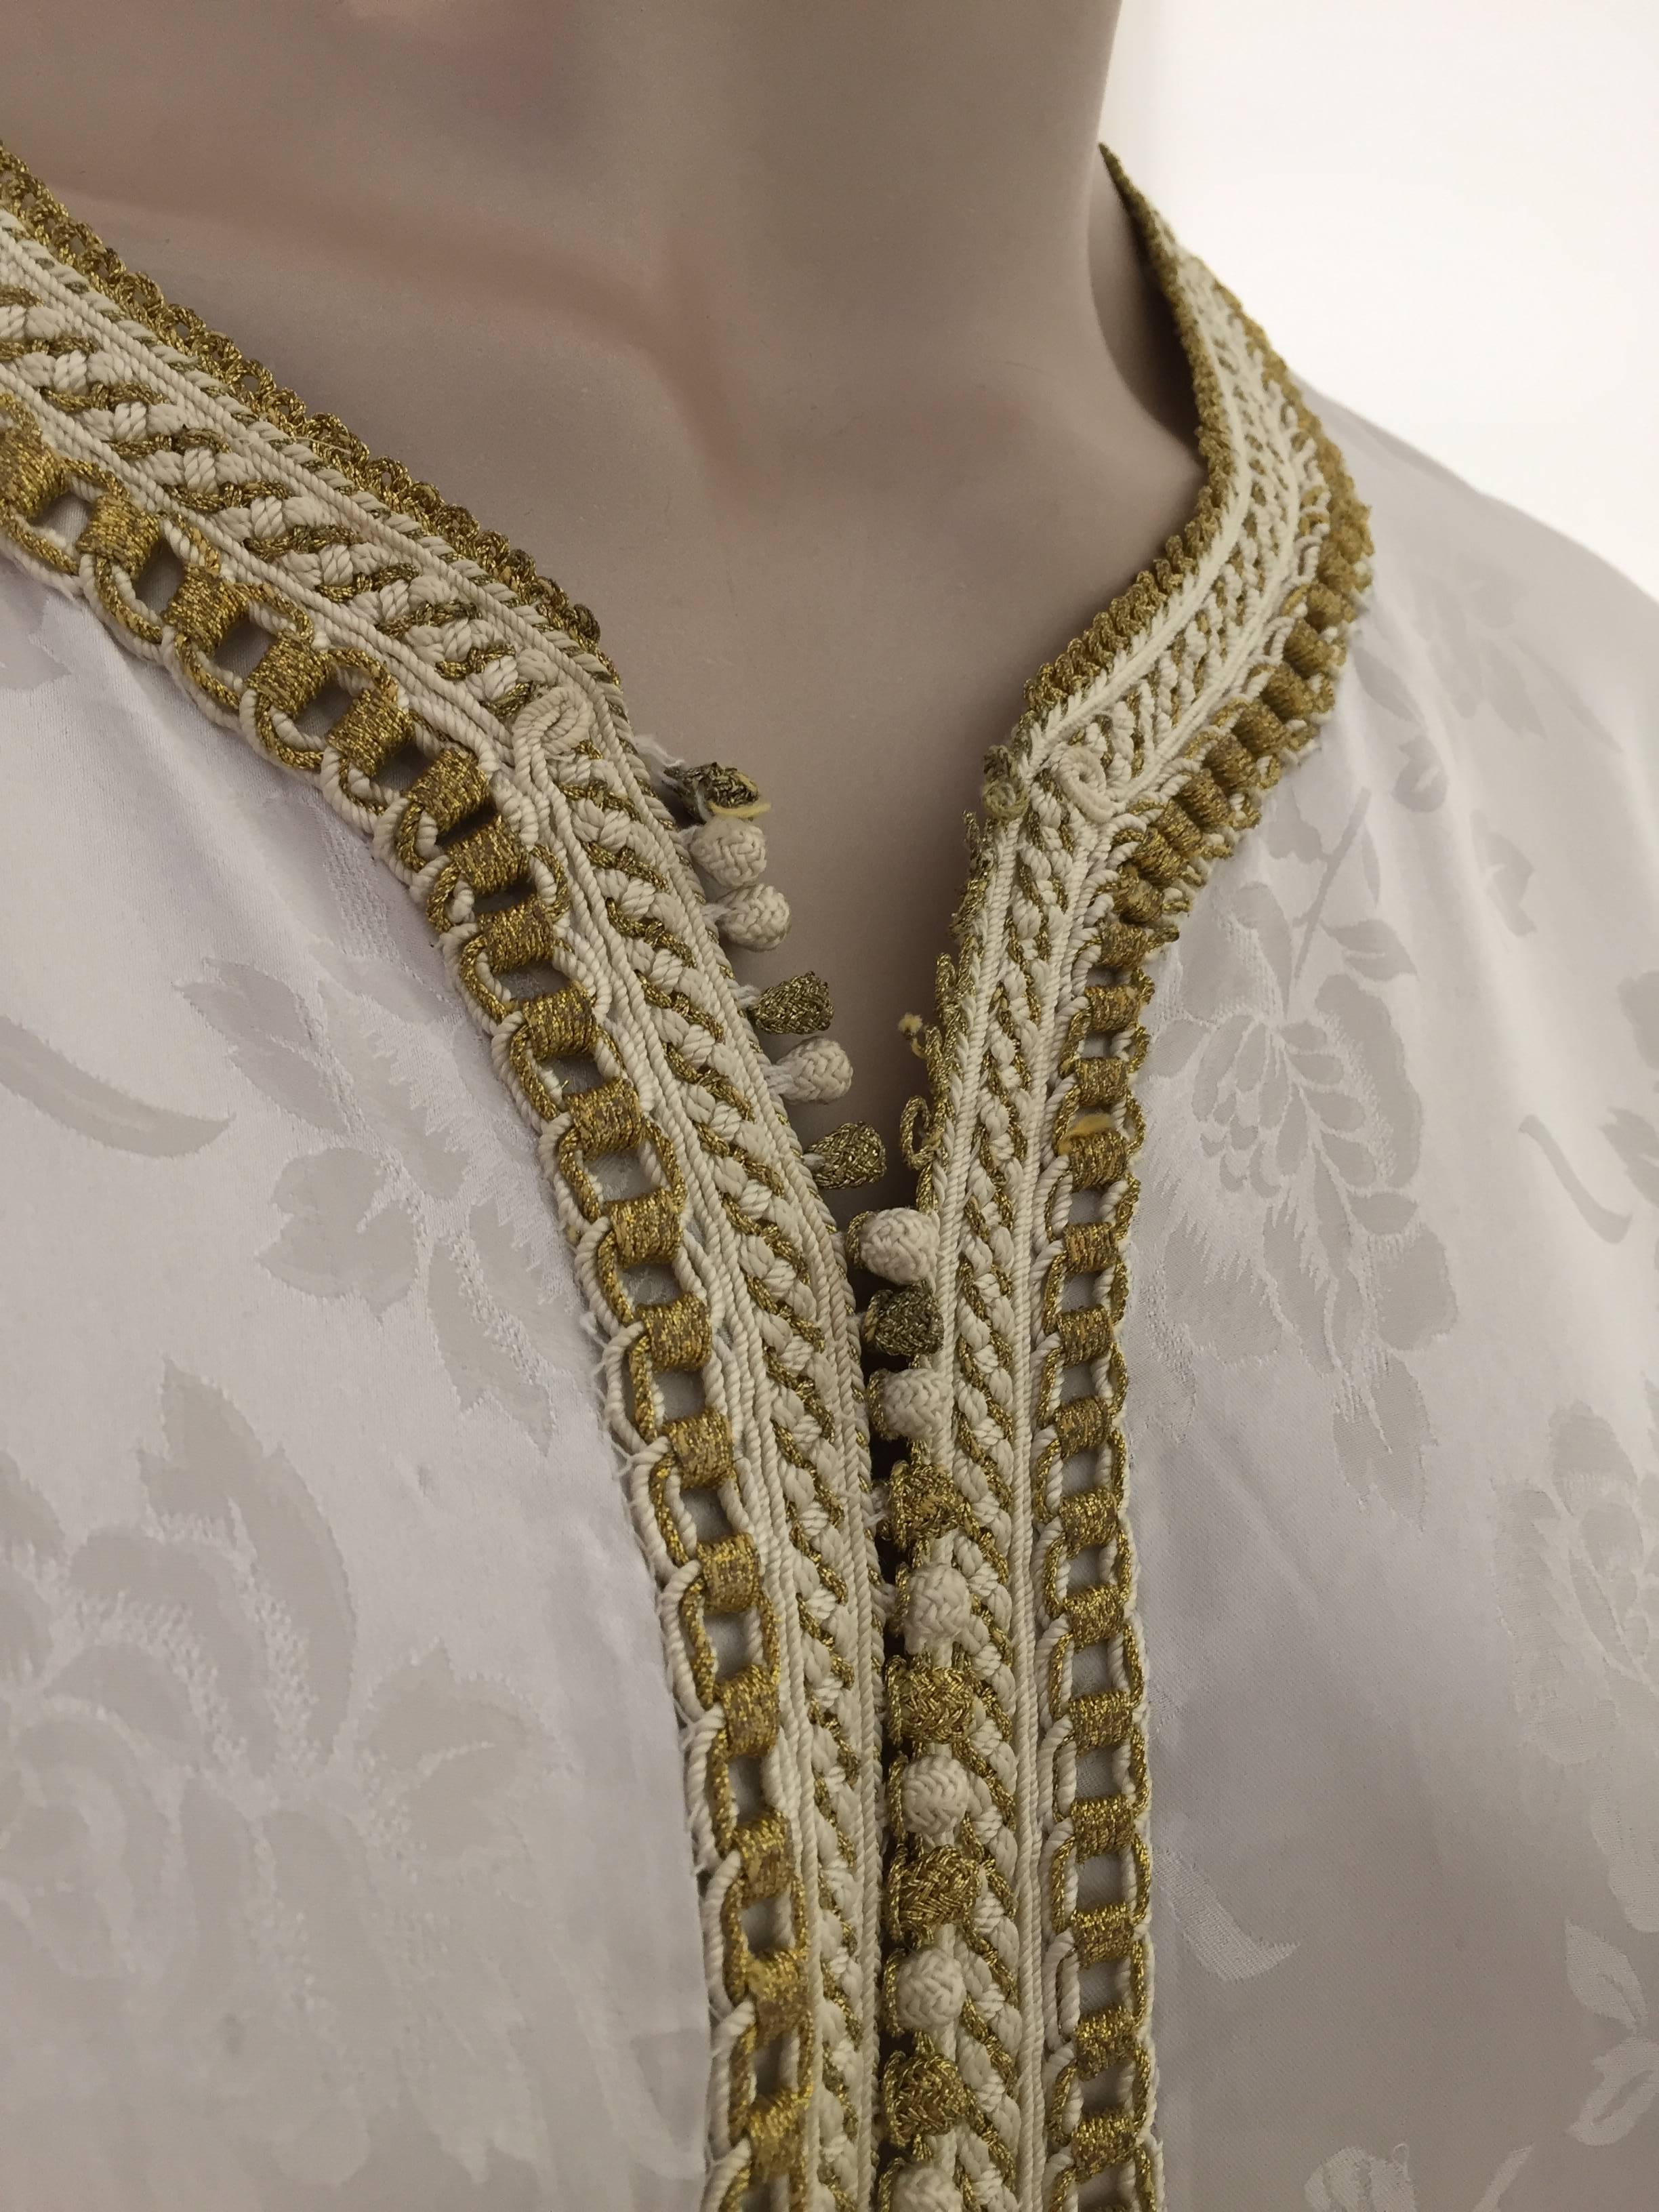 Moroccan Caftan Gown White Embroidered with Gold Trim, circa 1970 For Sale 4